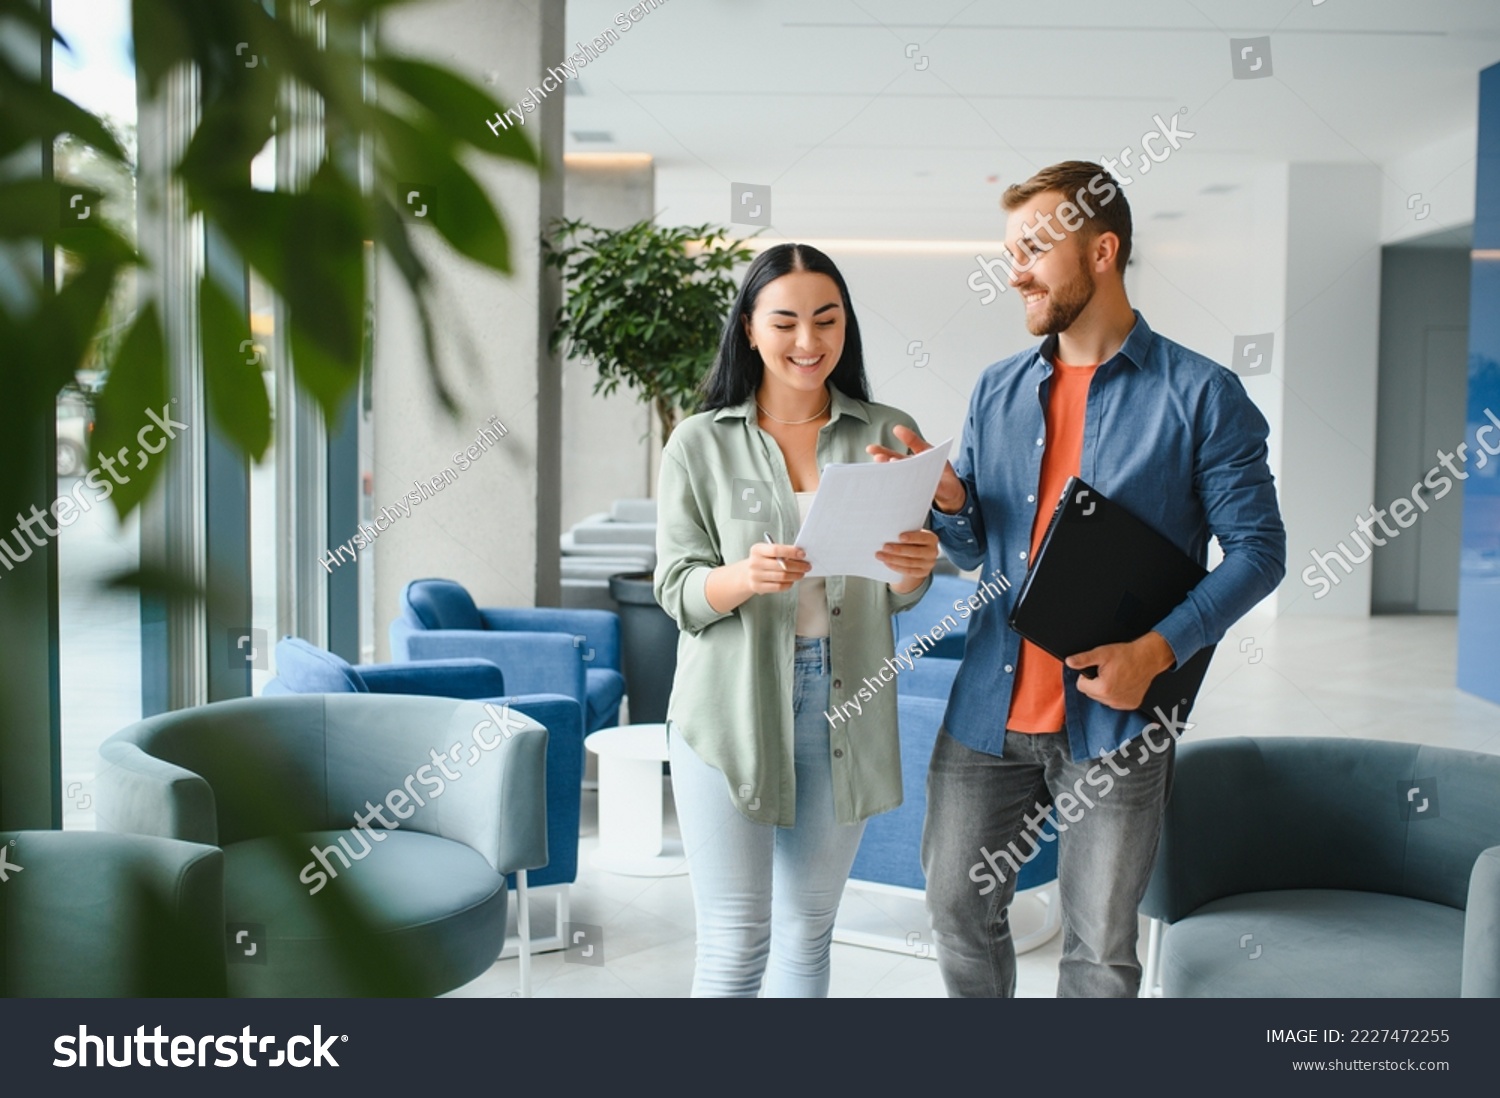 Two business coworkers walking through a lobby of an office building. #2227472255